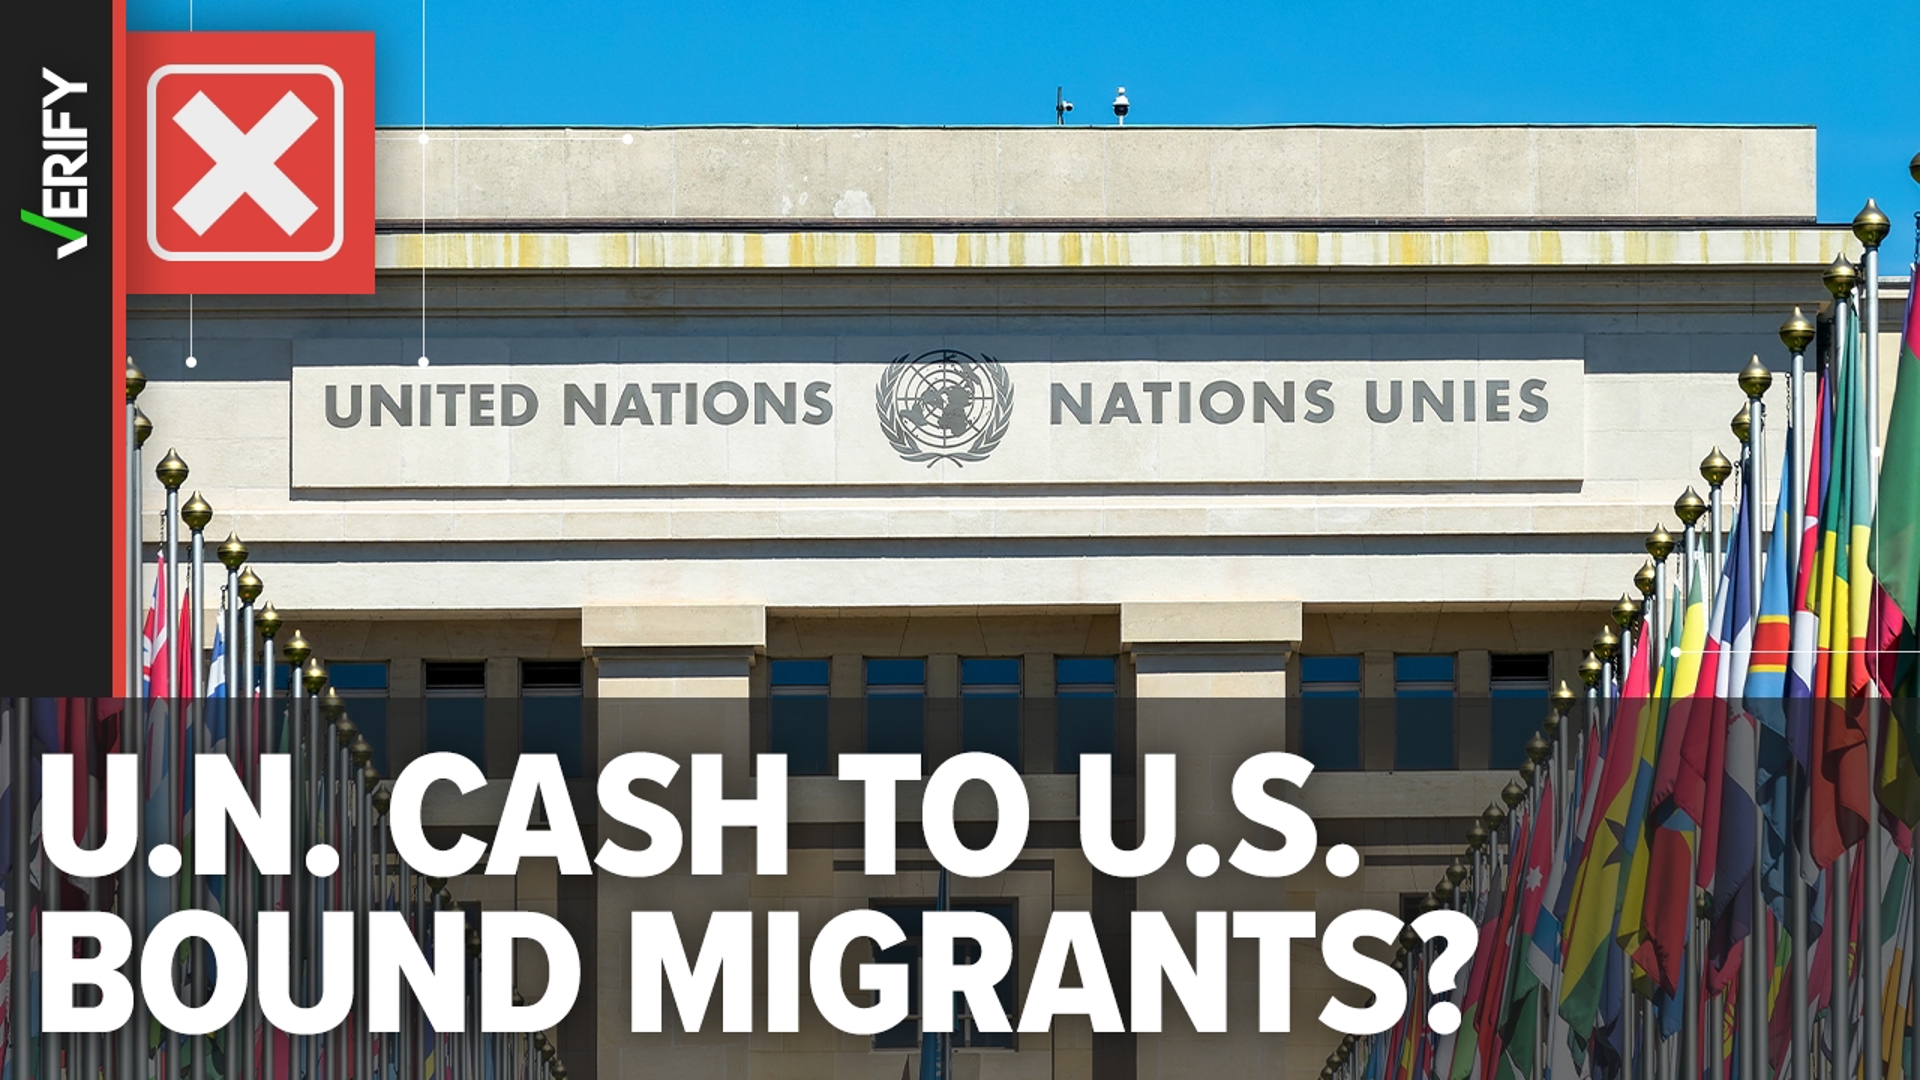 The United Nations’ International Organization for Migration (IOM) and the U.N. Refugee Agency do not give cash to migrants entering the U.S. via the Mexico border.